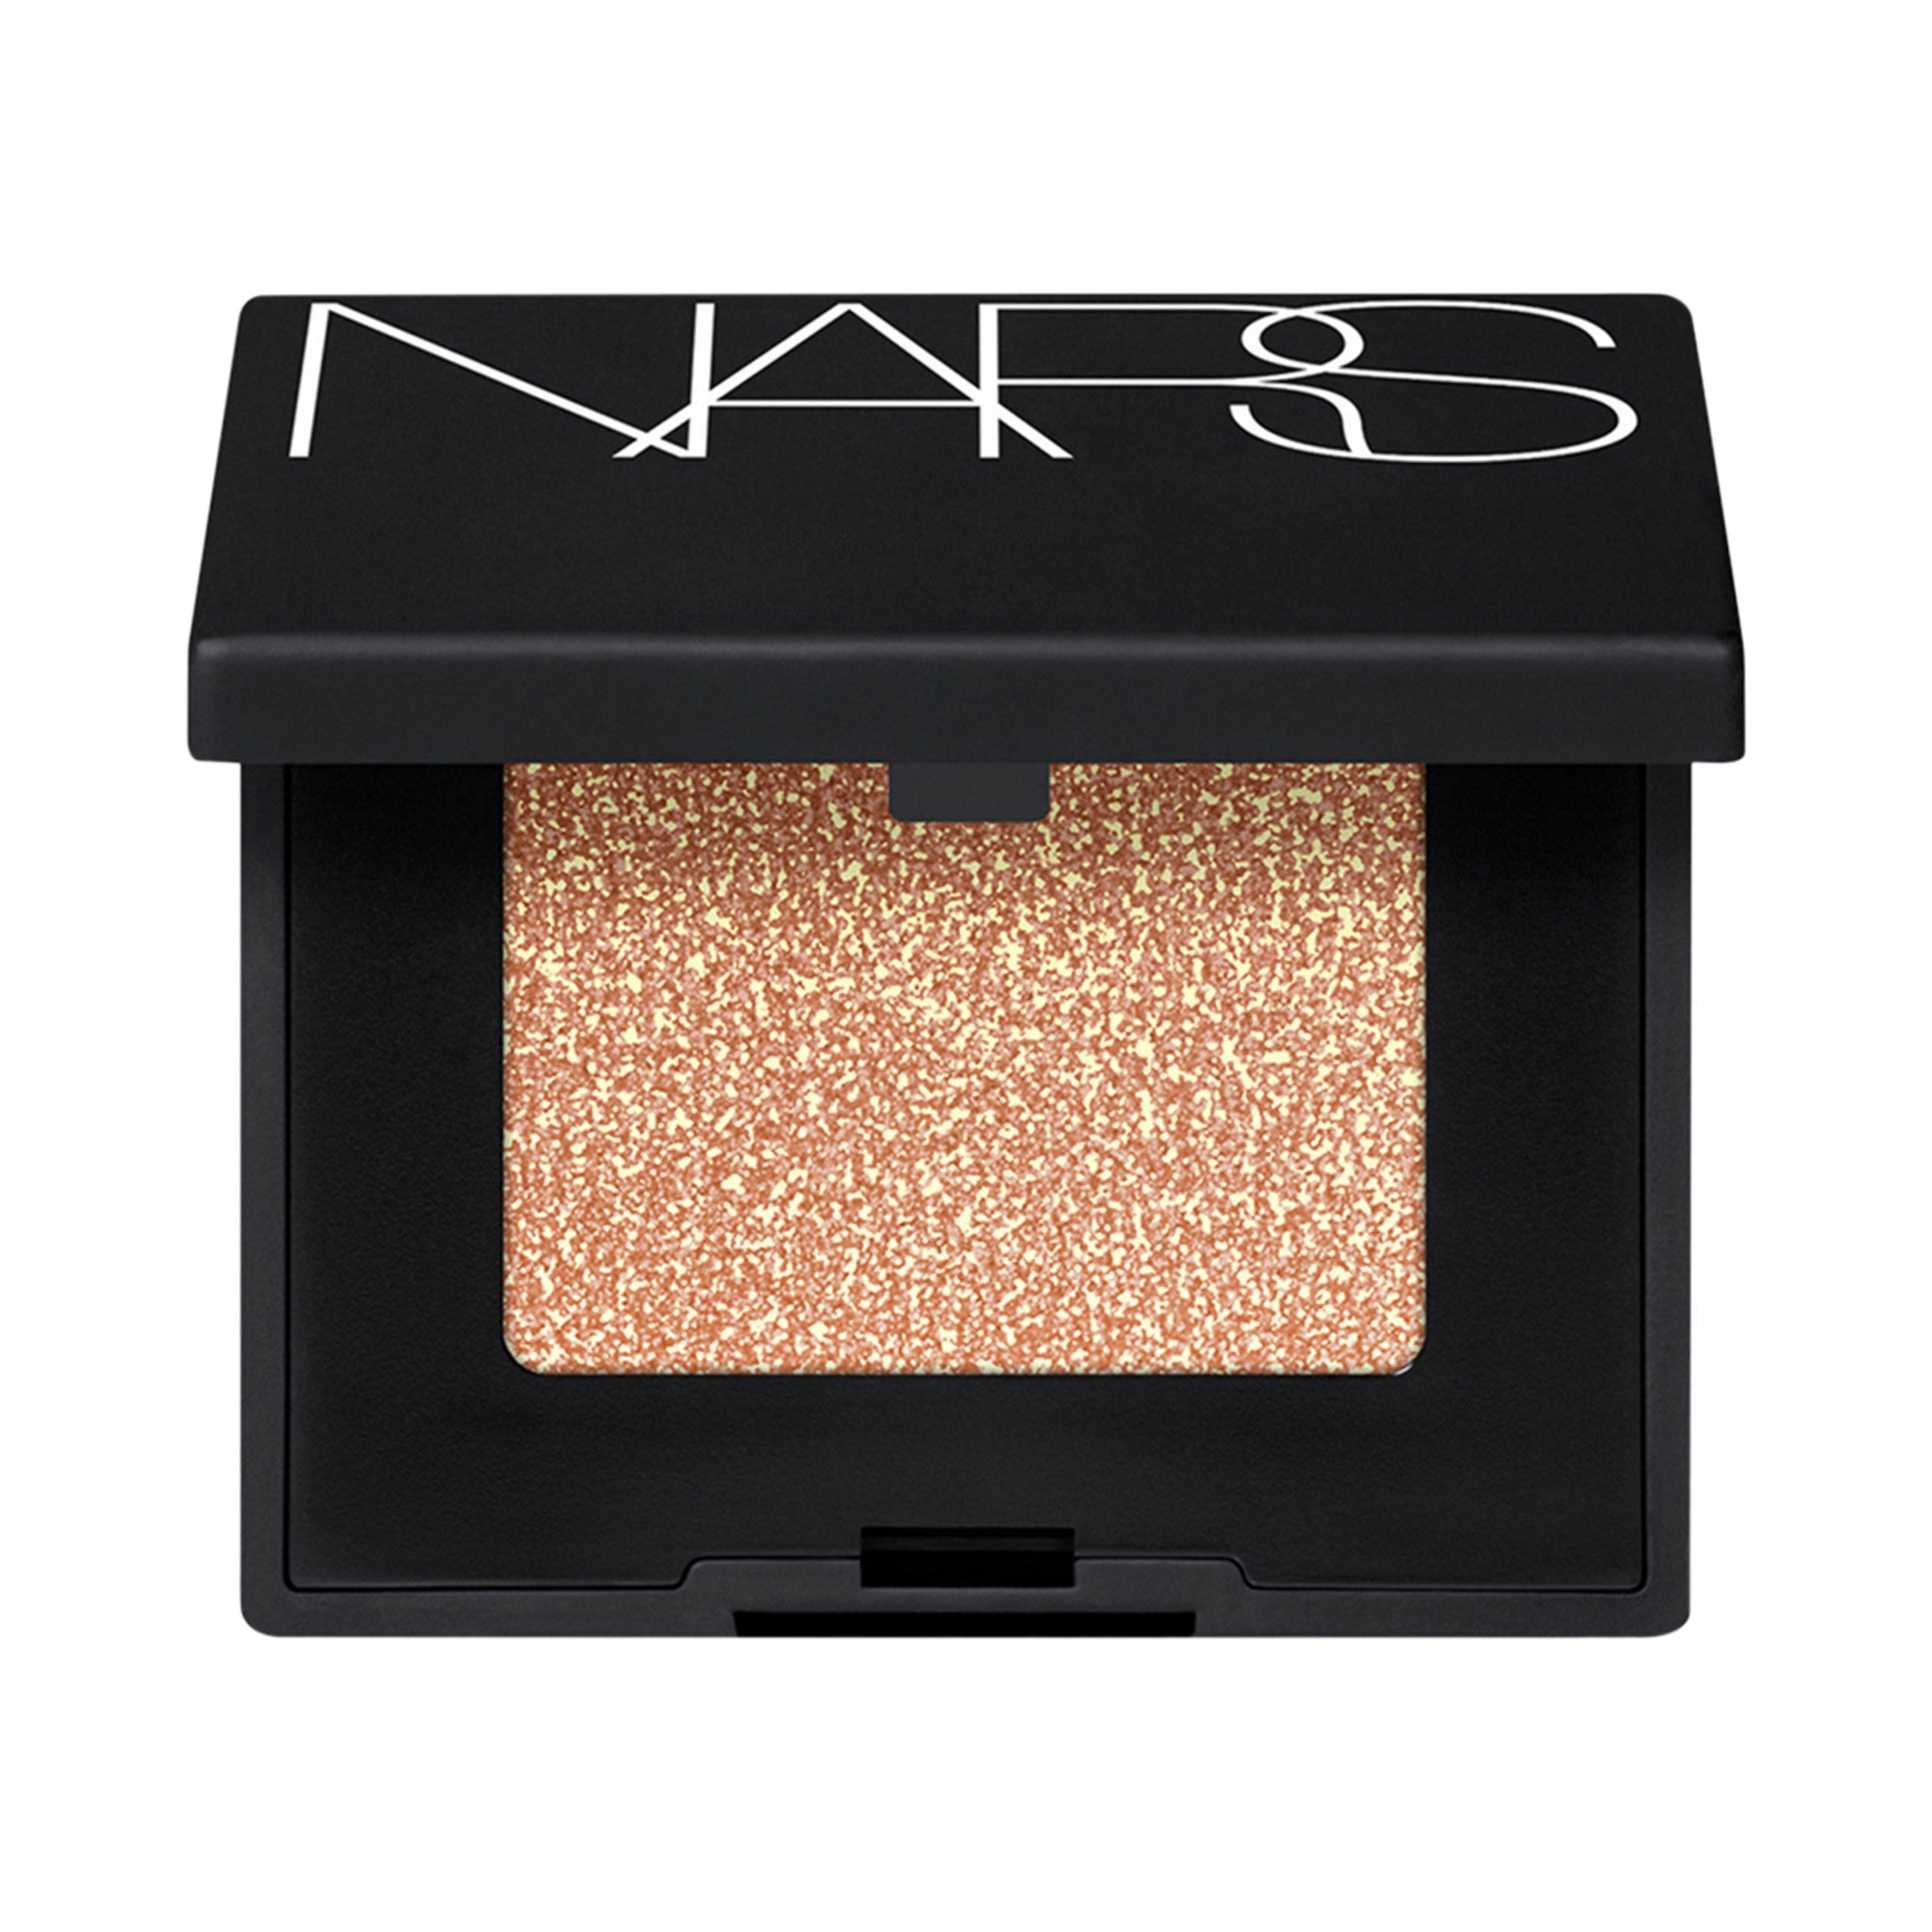 Nars Hardwired Eyeshadow Color/Shade variant: Pattaya main image. This product is in the color pink